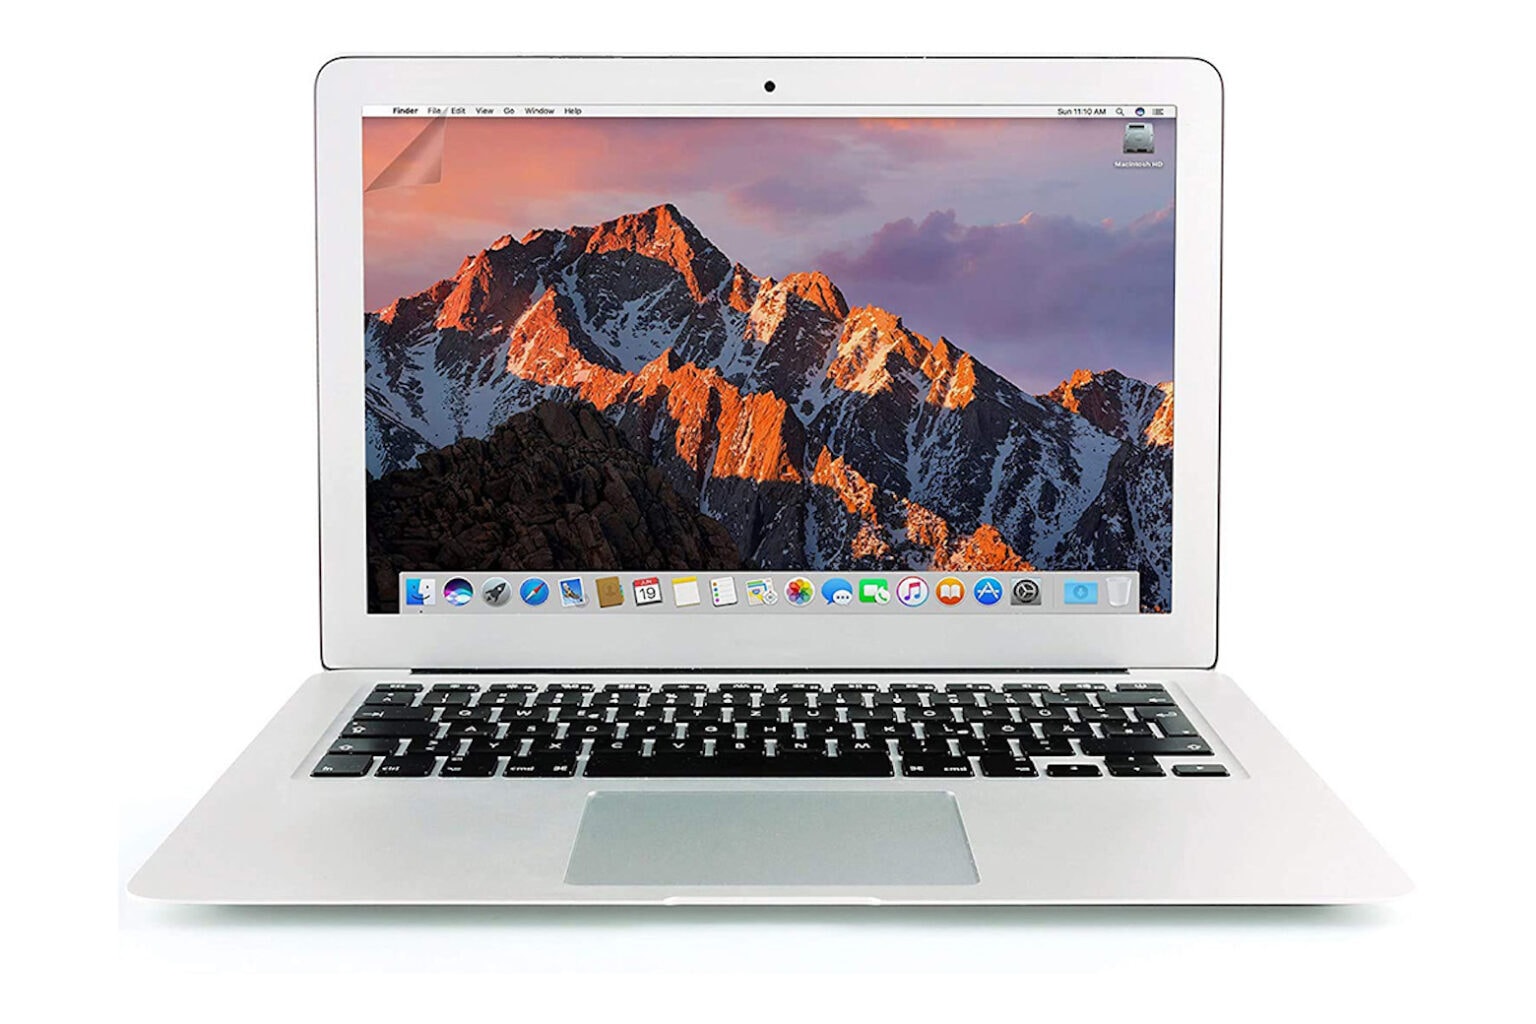 Kick off Labor Day with $144 off a refurbished MacBook Air.